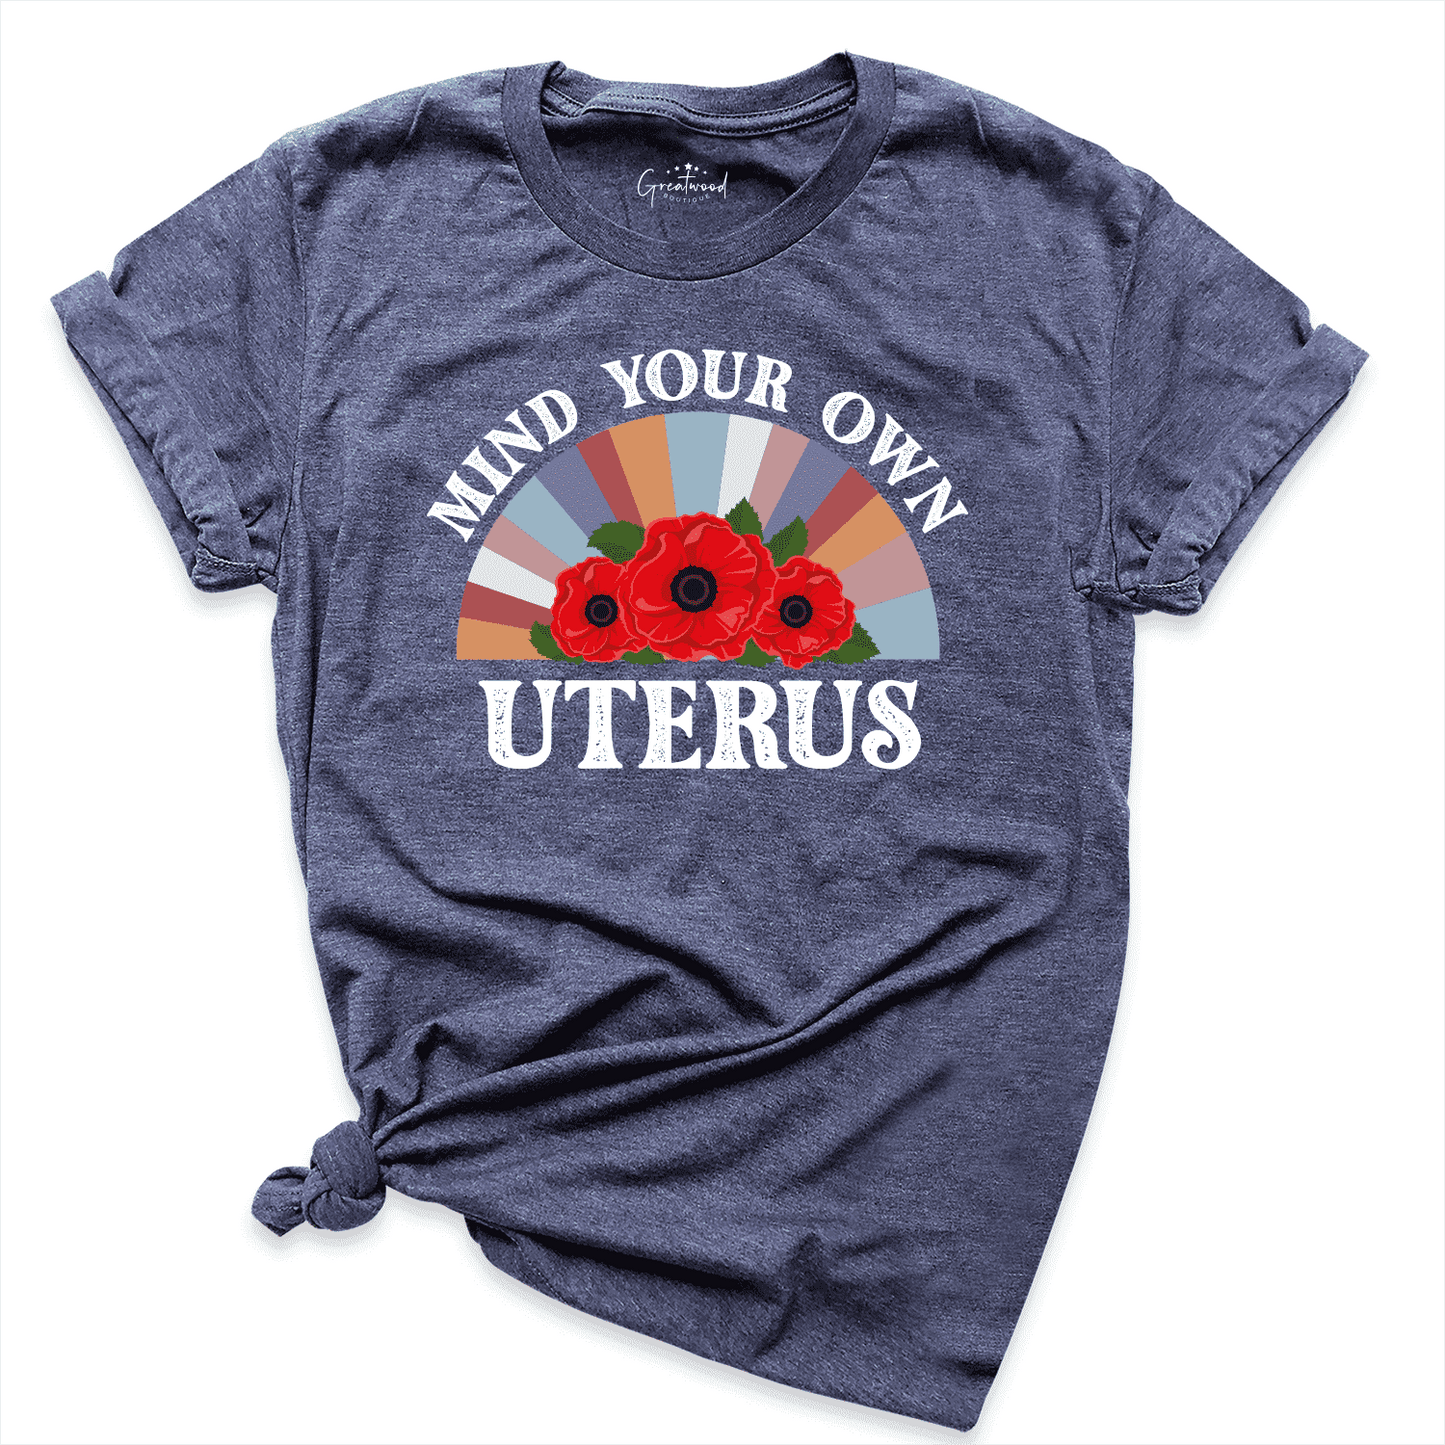 Mind Your Own Uterus Shirt Navy - Greatwood Boutique